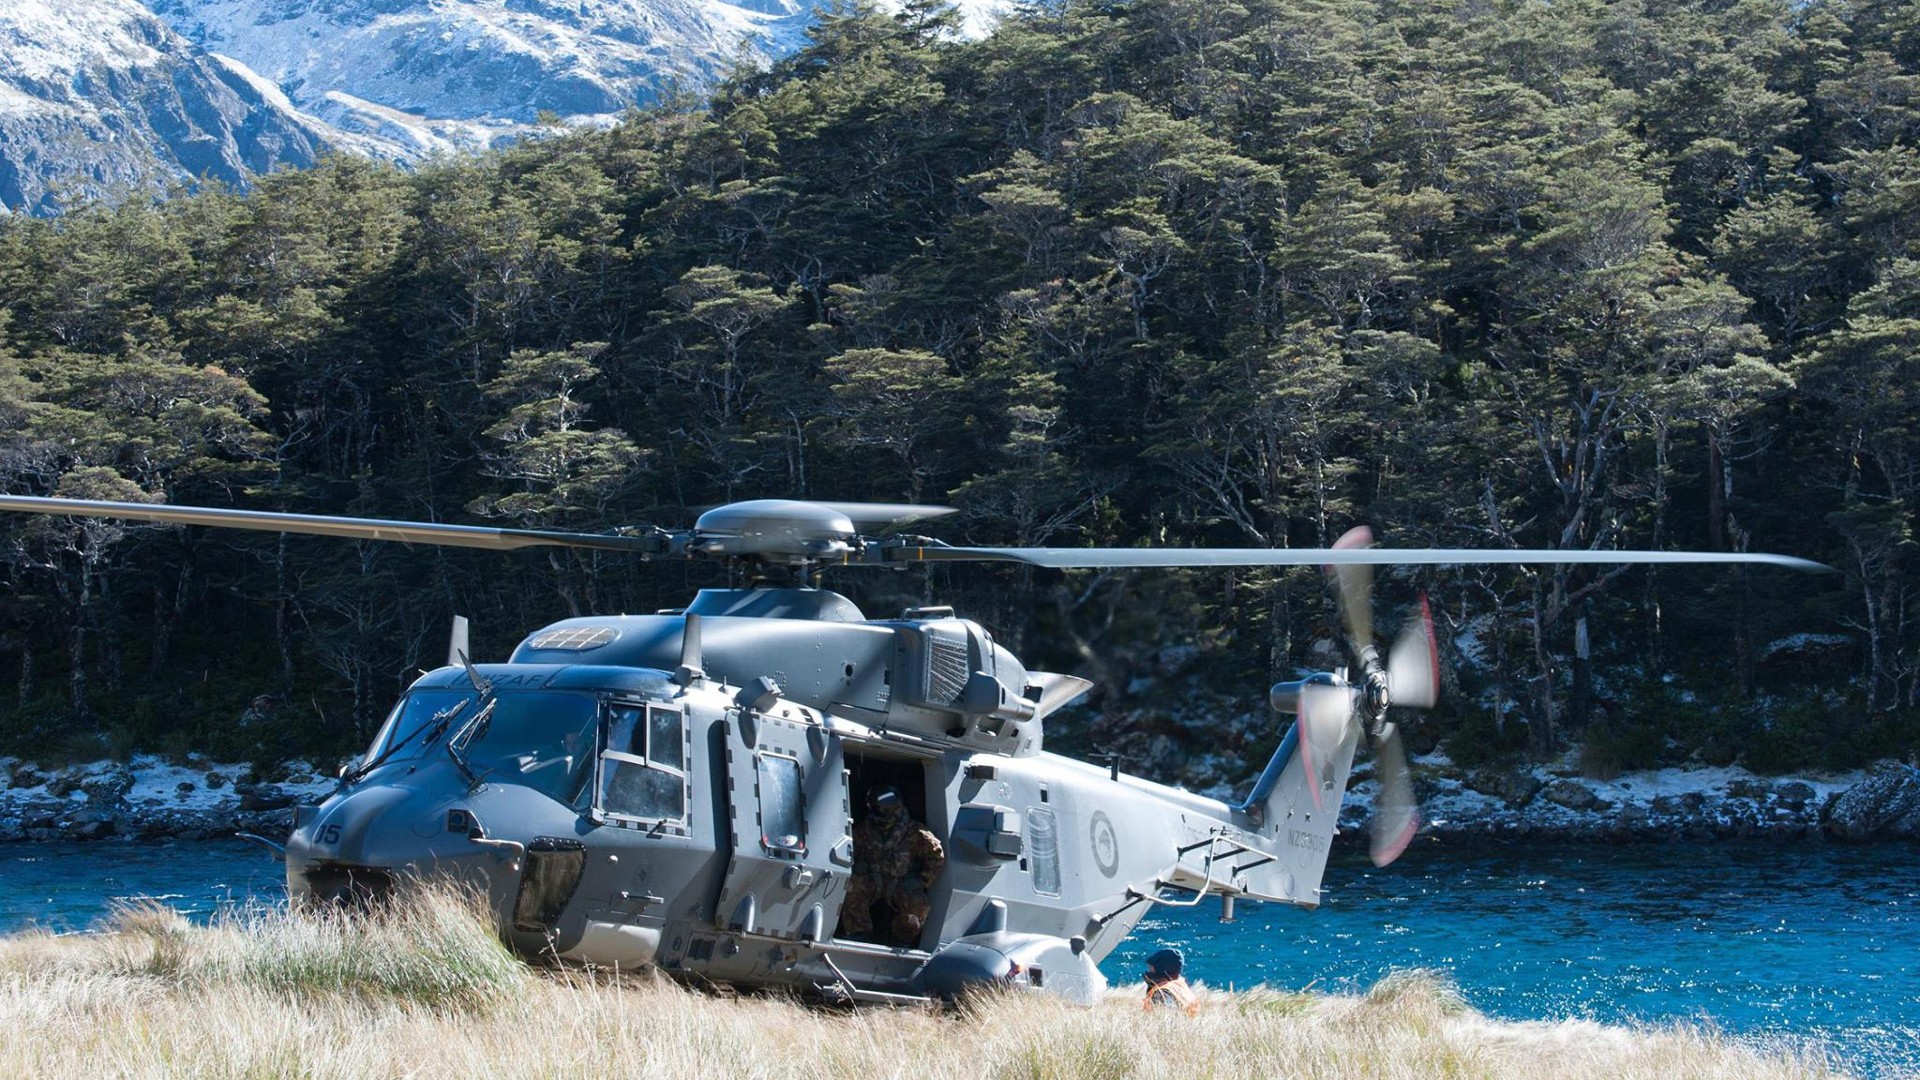 military, Helicopters, Soldier, Royal New Zealand Air Force, NHIndustries NH90, Military Aircraft, New Zealand Wallpaper